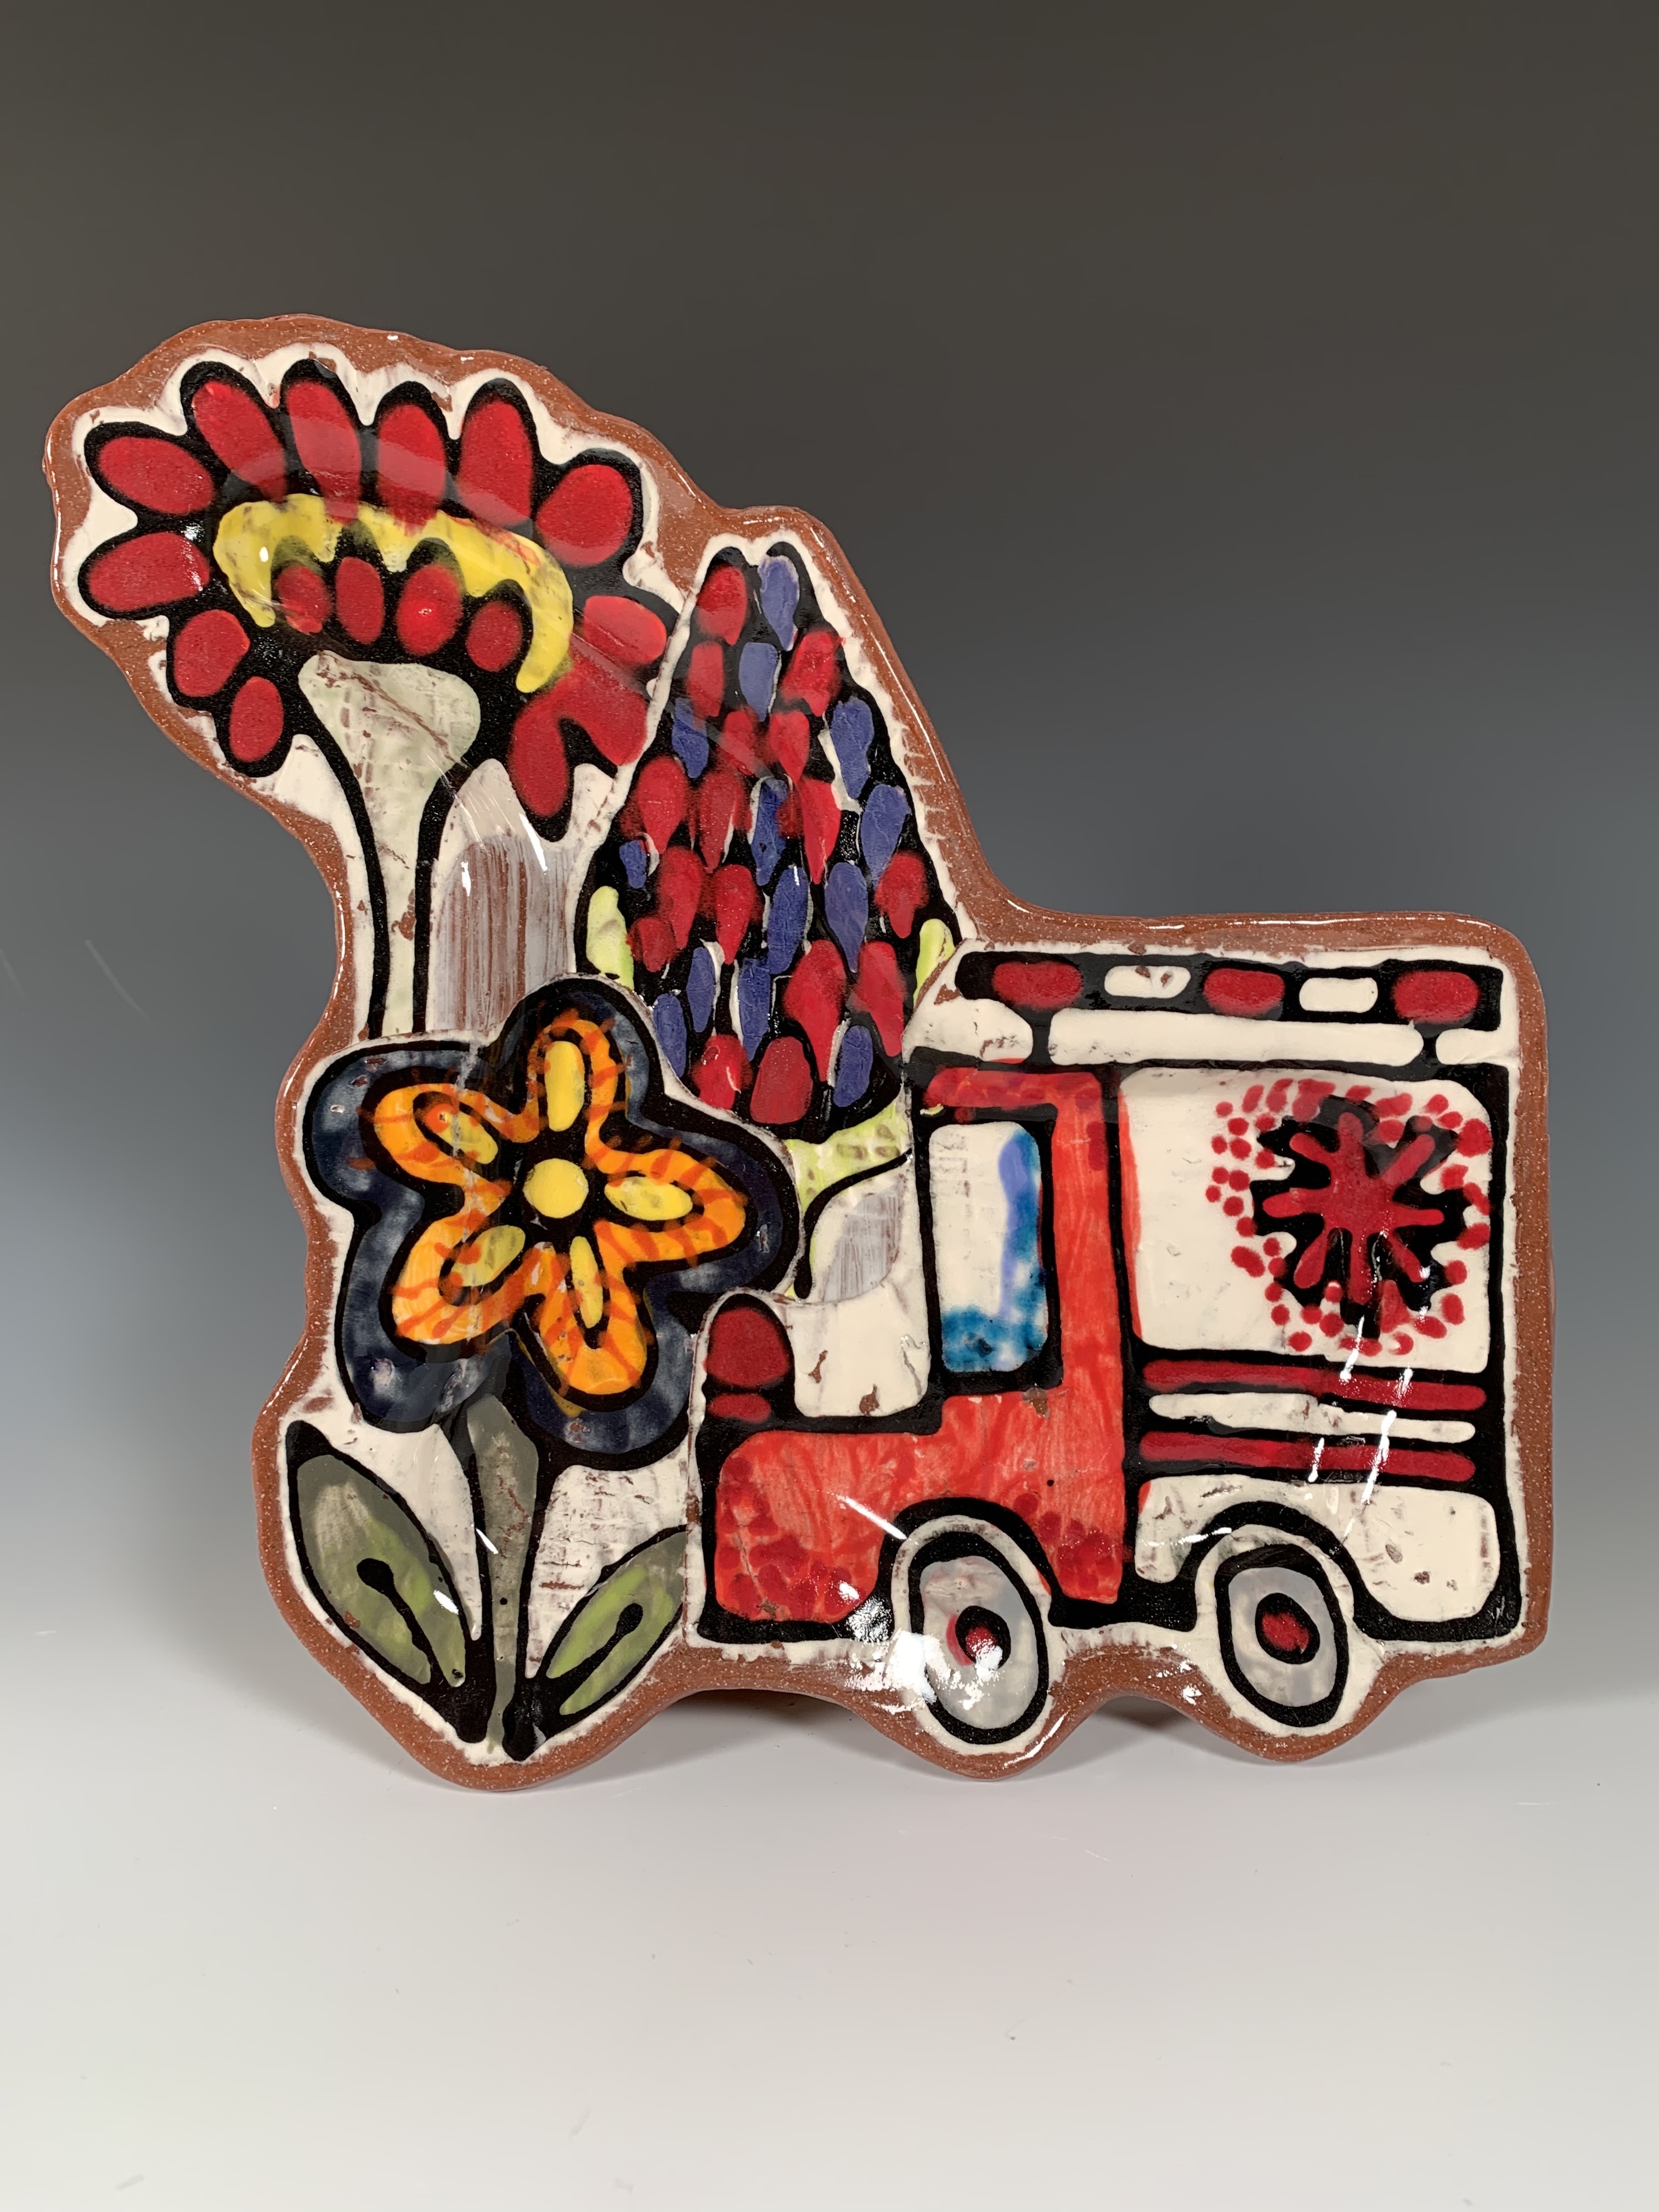 Plate painted with image of an ambulance and flowers